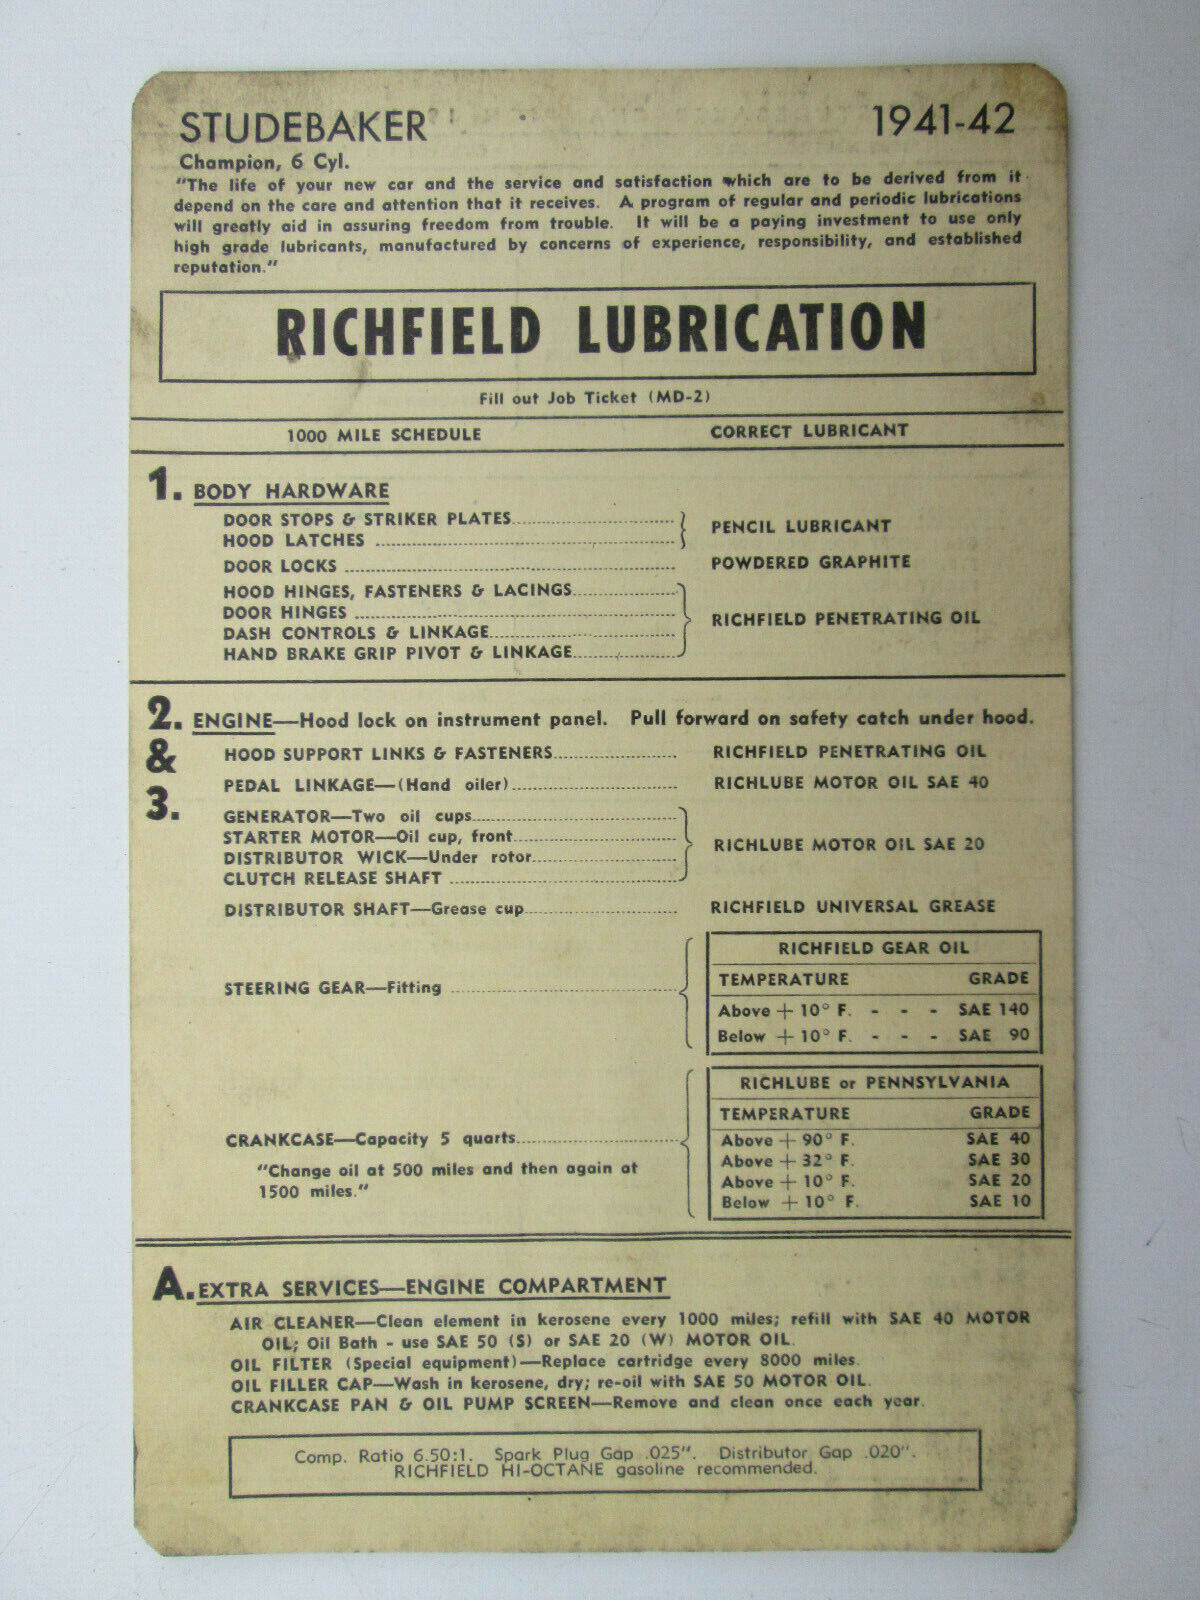 Richfield Lubrication Reference Card for Studebaker Champion 6 Cyl 1941 1942